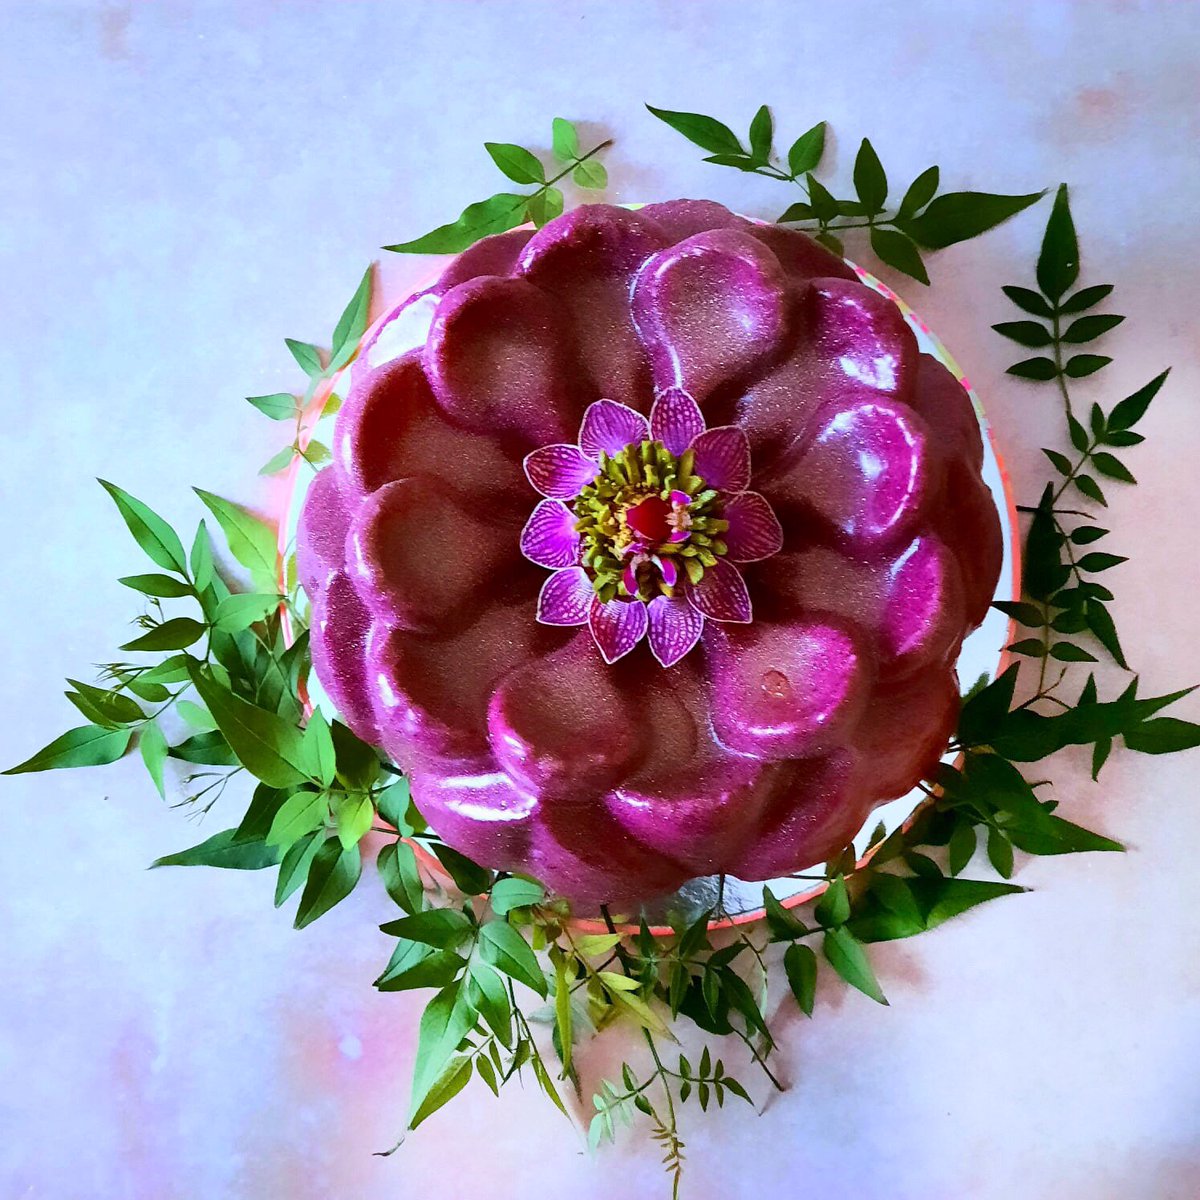 When the cake is a flower 🌸 Blueberry and pistachio bundt with all natural blueberry glaze. #birthdaycake